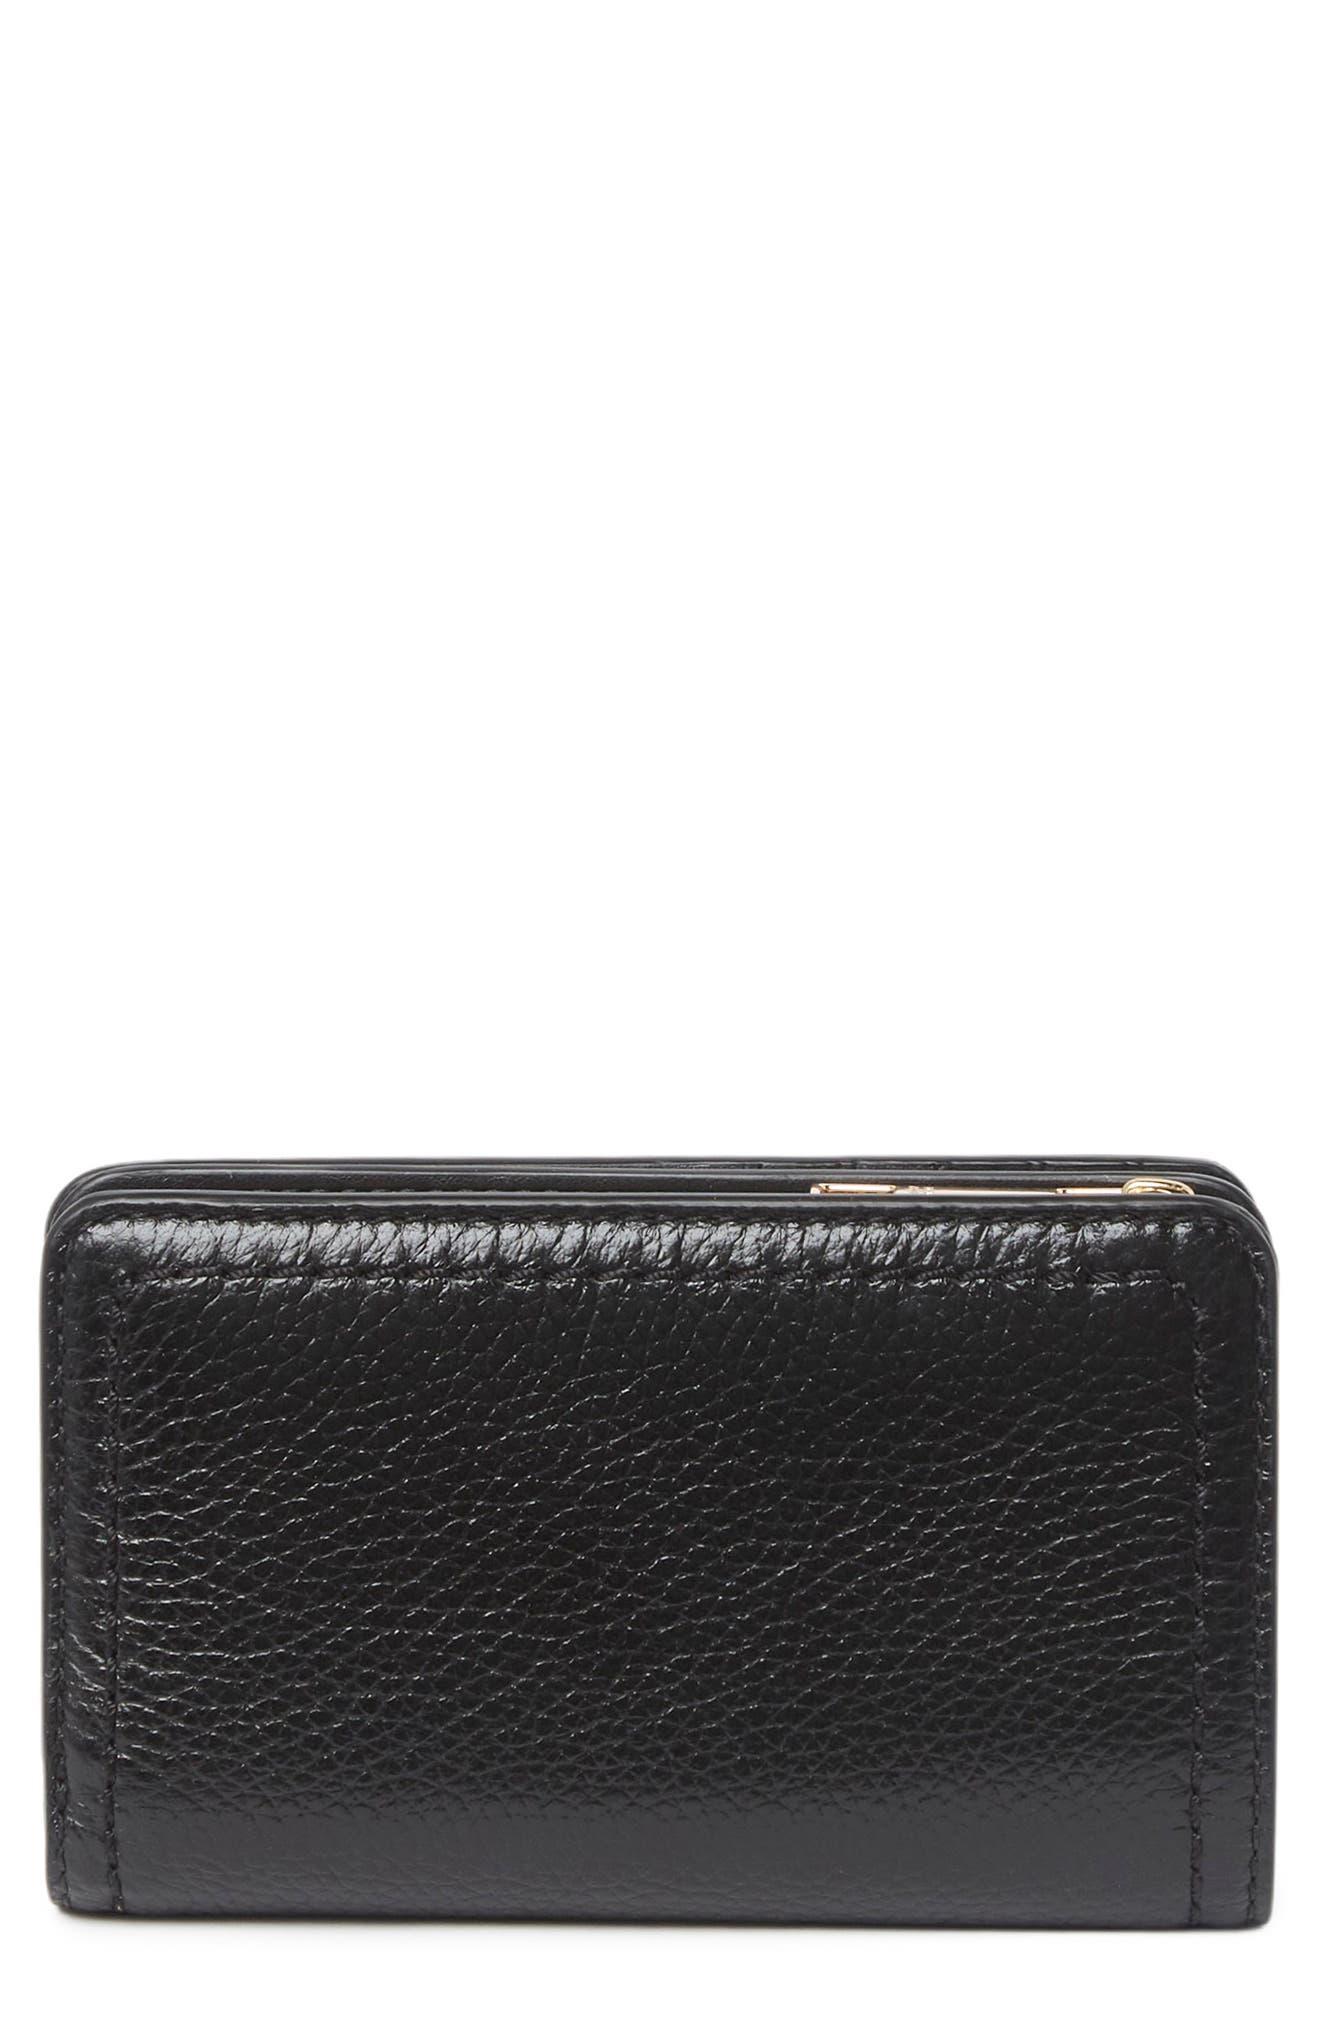 Marc Jacobs Topstitched Compact Zip Wallet in Black | Lyst